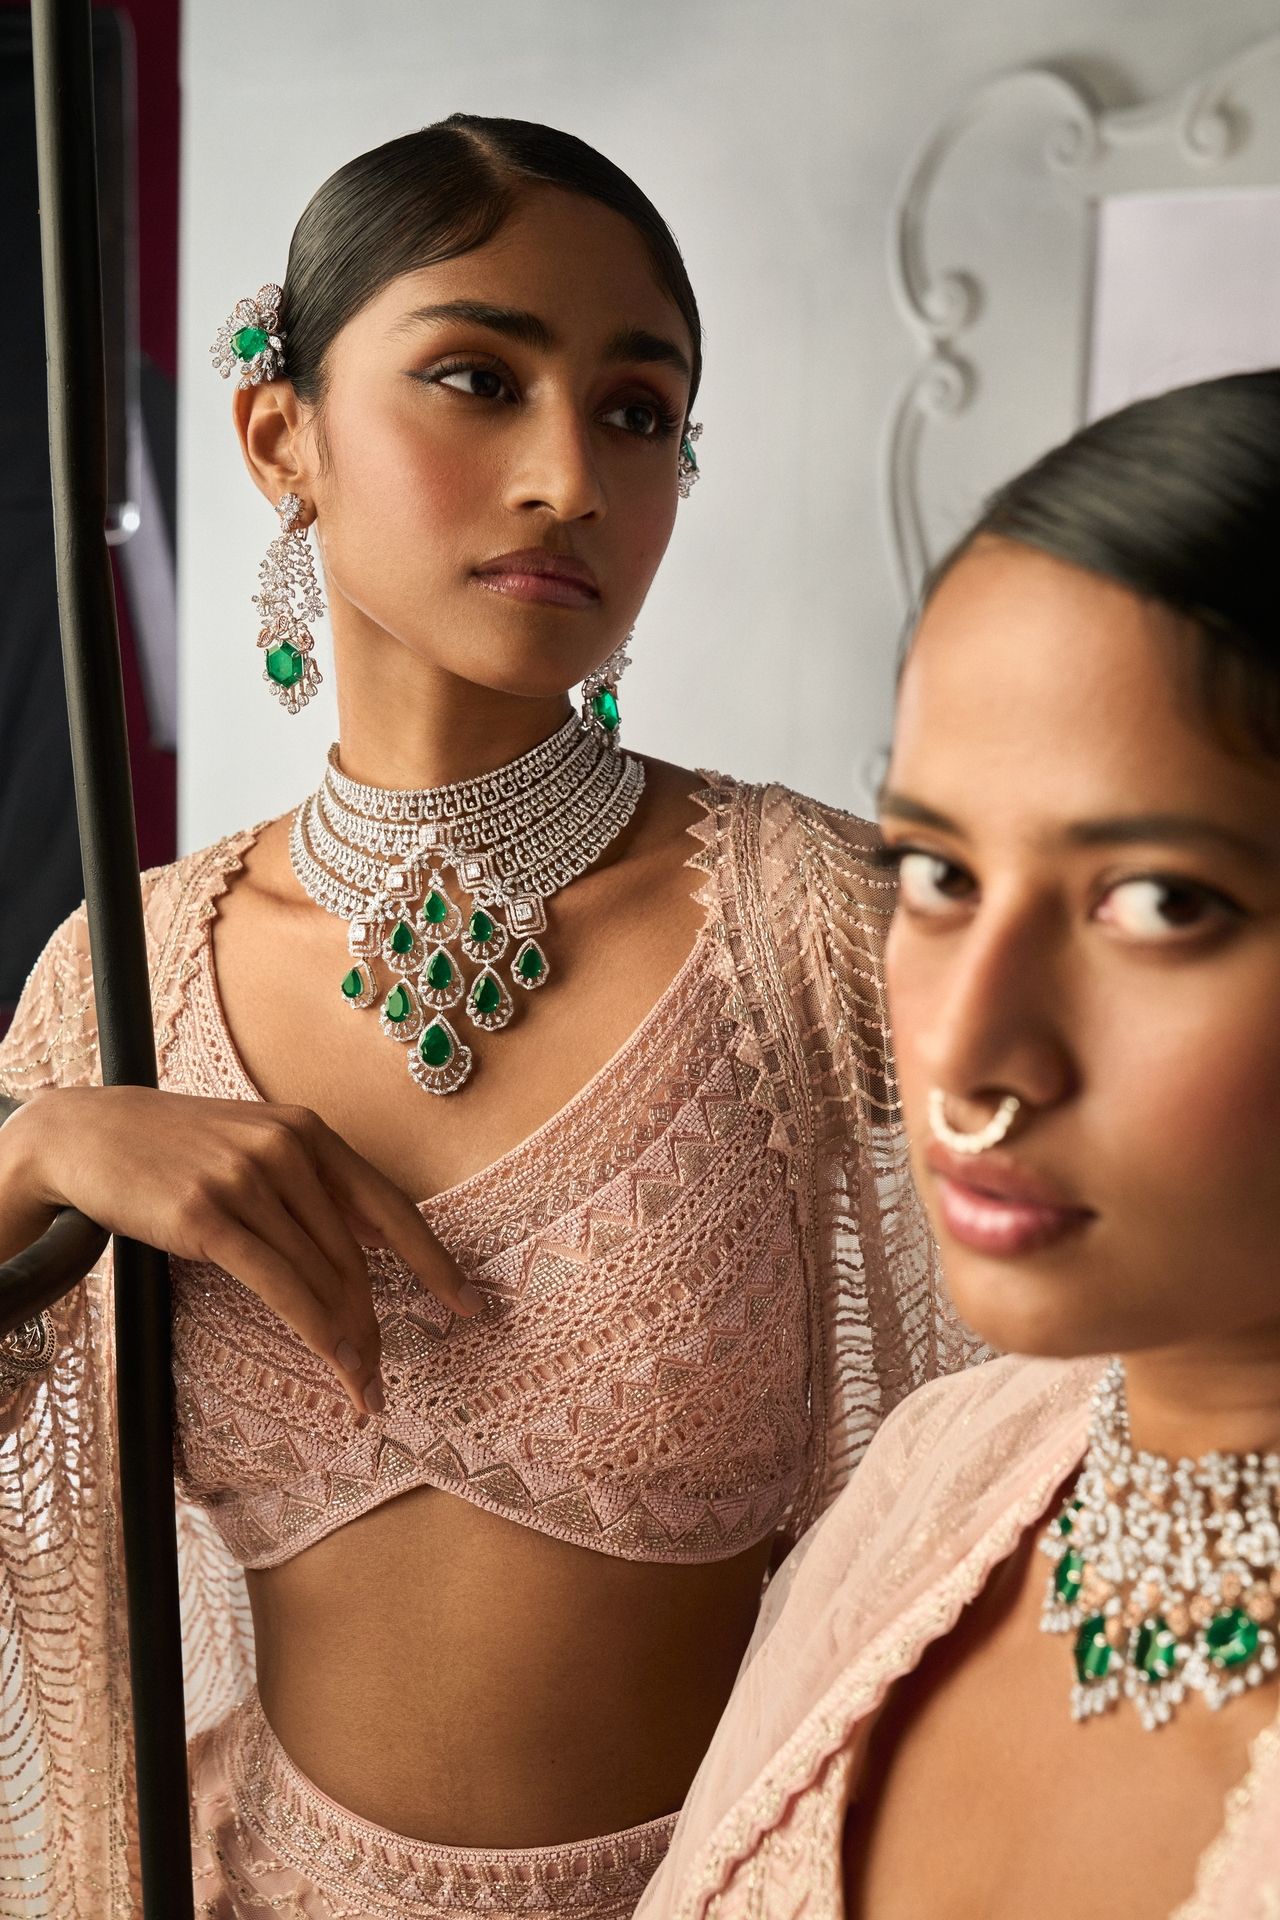 Each jewel in this collection is crafted to delicate perfection